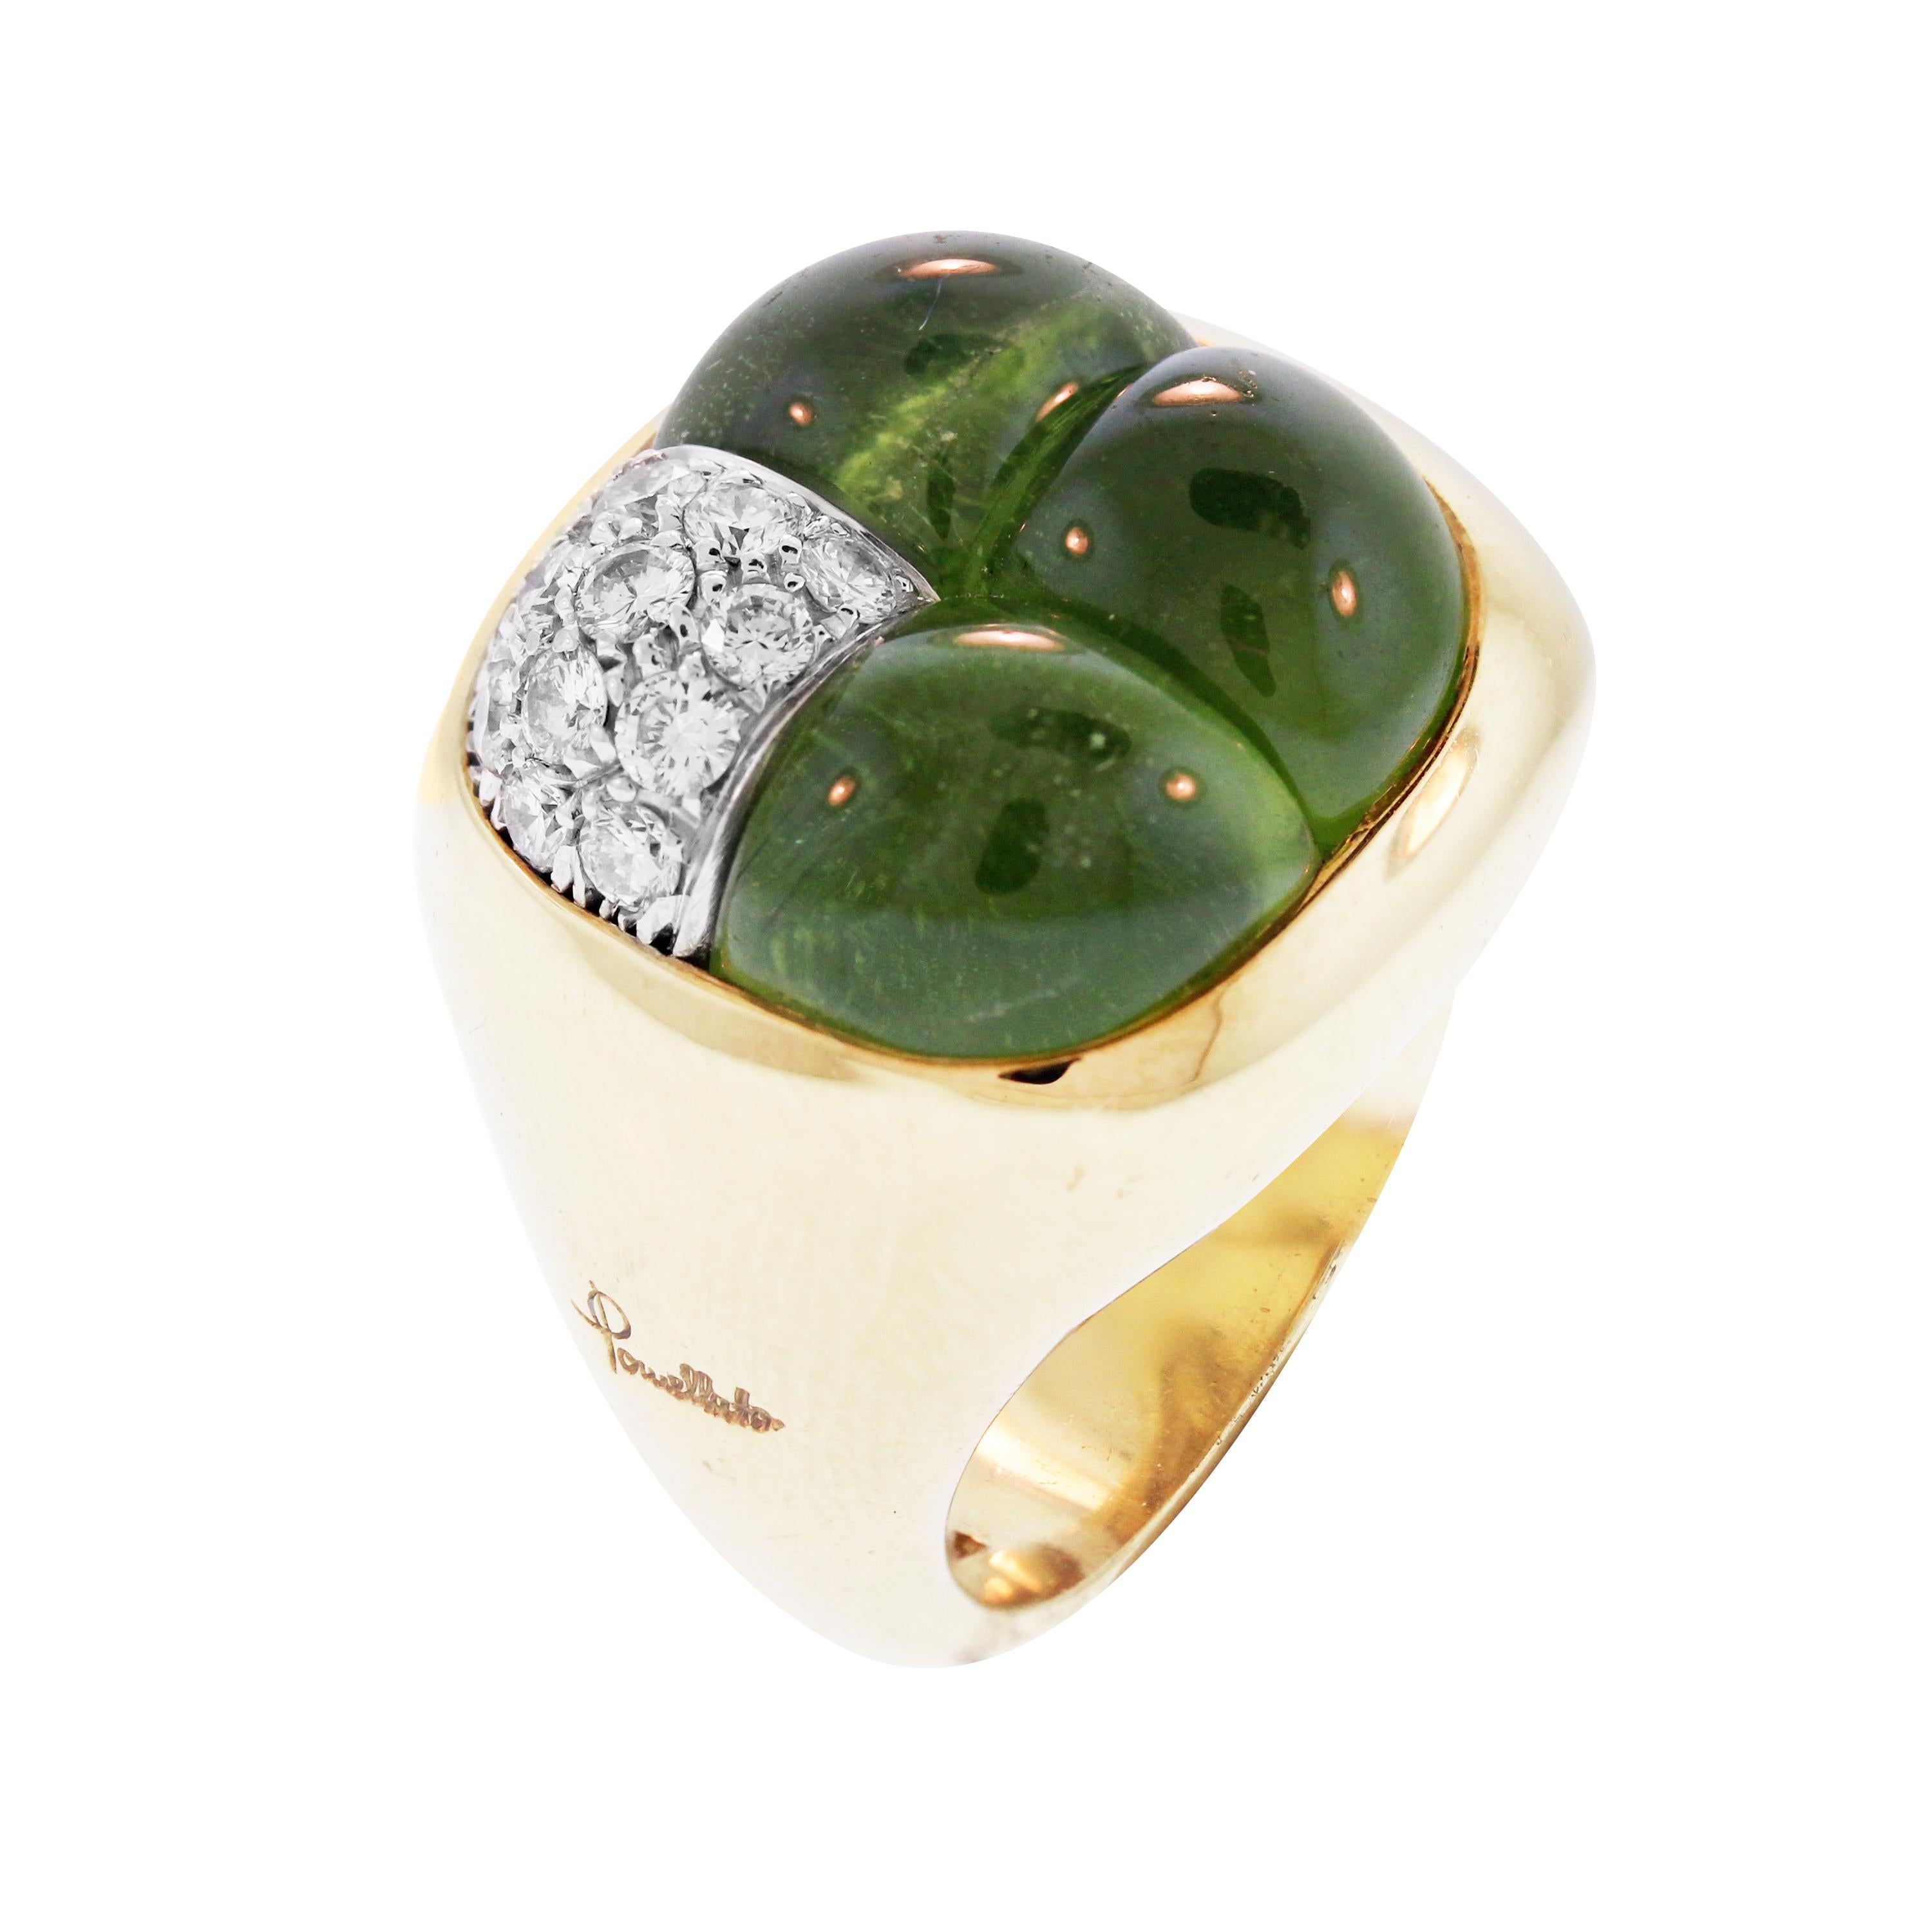 IF YOU ARE REALLY INTERESTED, CONTACT US WITH ANY REASONABLE OFFER. WE WILL TRY OUR BEST TO MAKE YOU HAPPY!

18K Yellow Gold and Diamond Ring with Three Special-cut Peridot by Pomellato

0.50 carat G color, VS clarity diamonds

Face of the ring